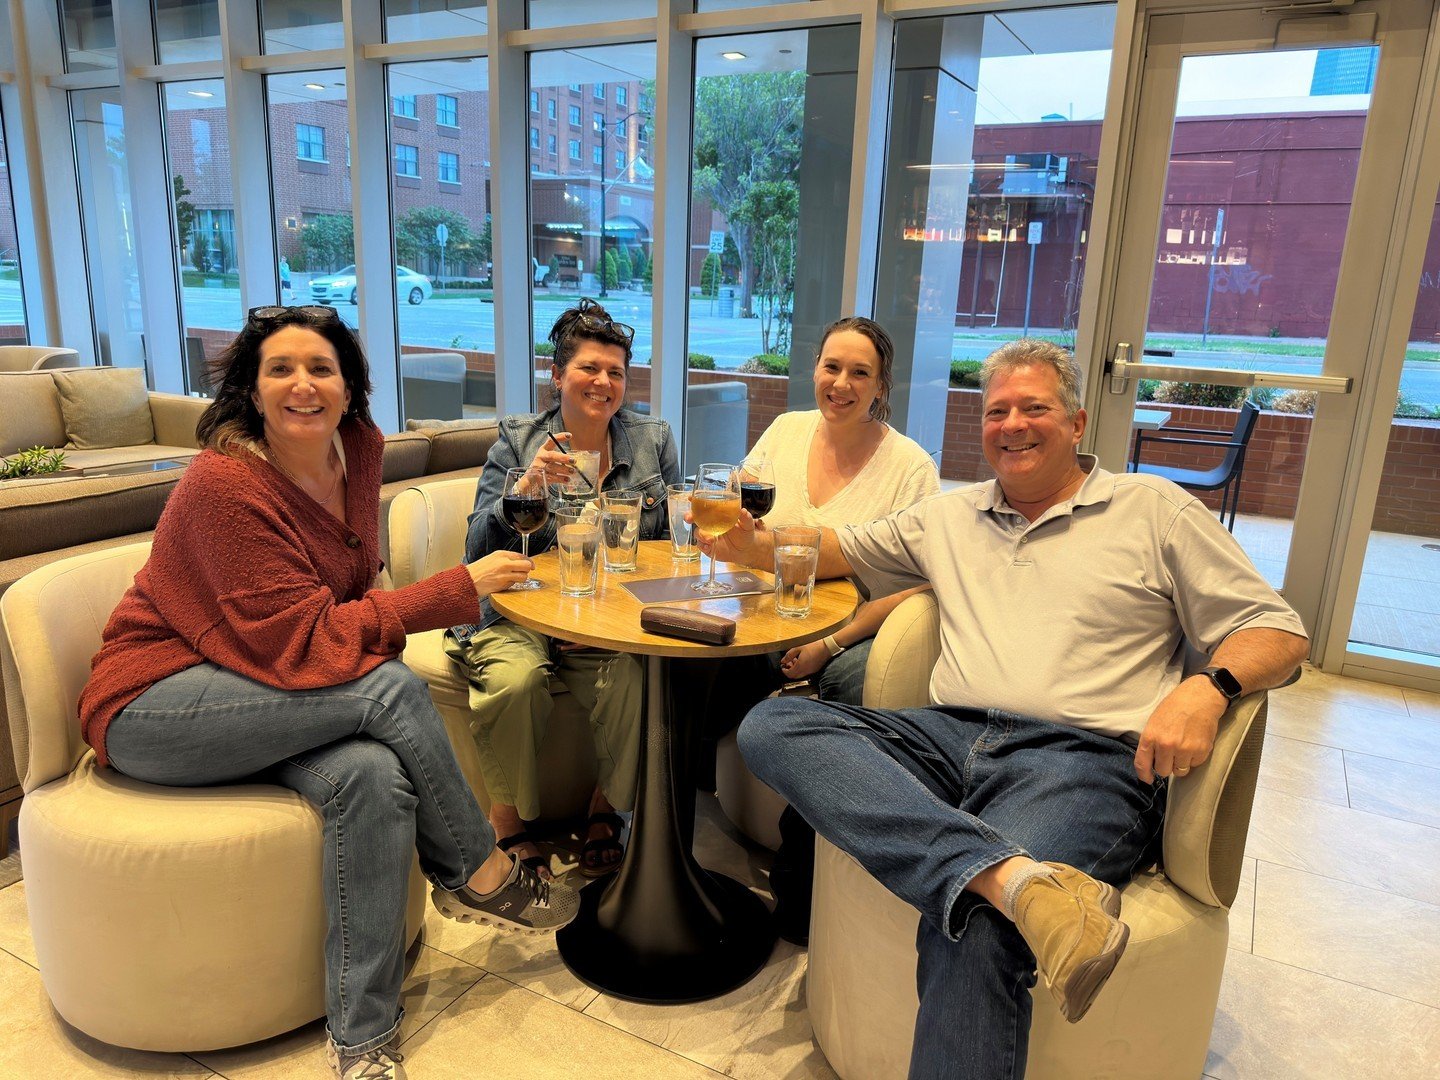 What a week it was! From Alaska to Florida, Maine to California, our 'Driving Practice Success' meeting last week in Oklahoma City was a whirl of insights and exciting key takeaways for how OPIE makes life better. We learned, shared, and even delved 